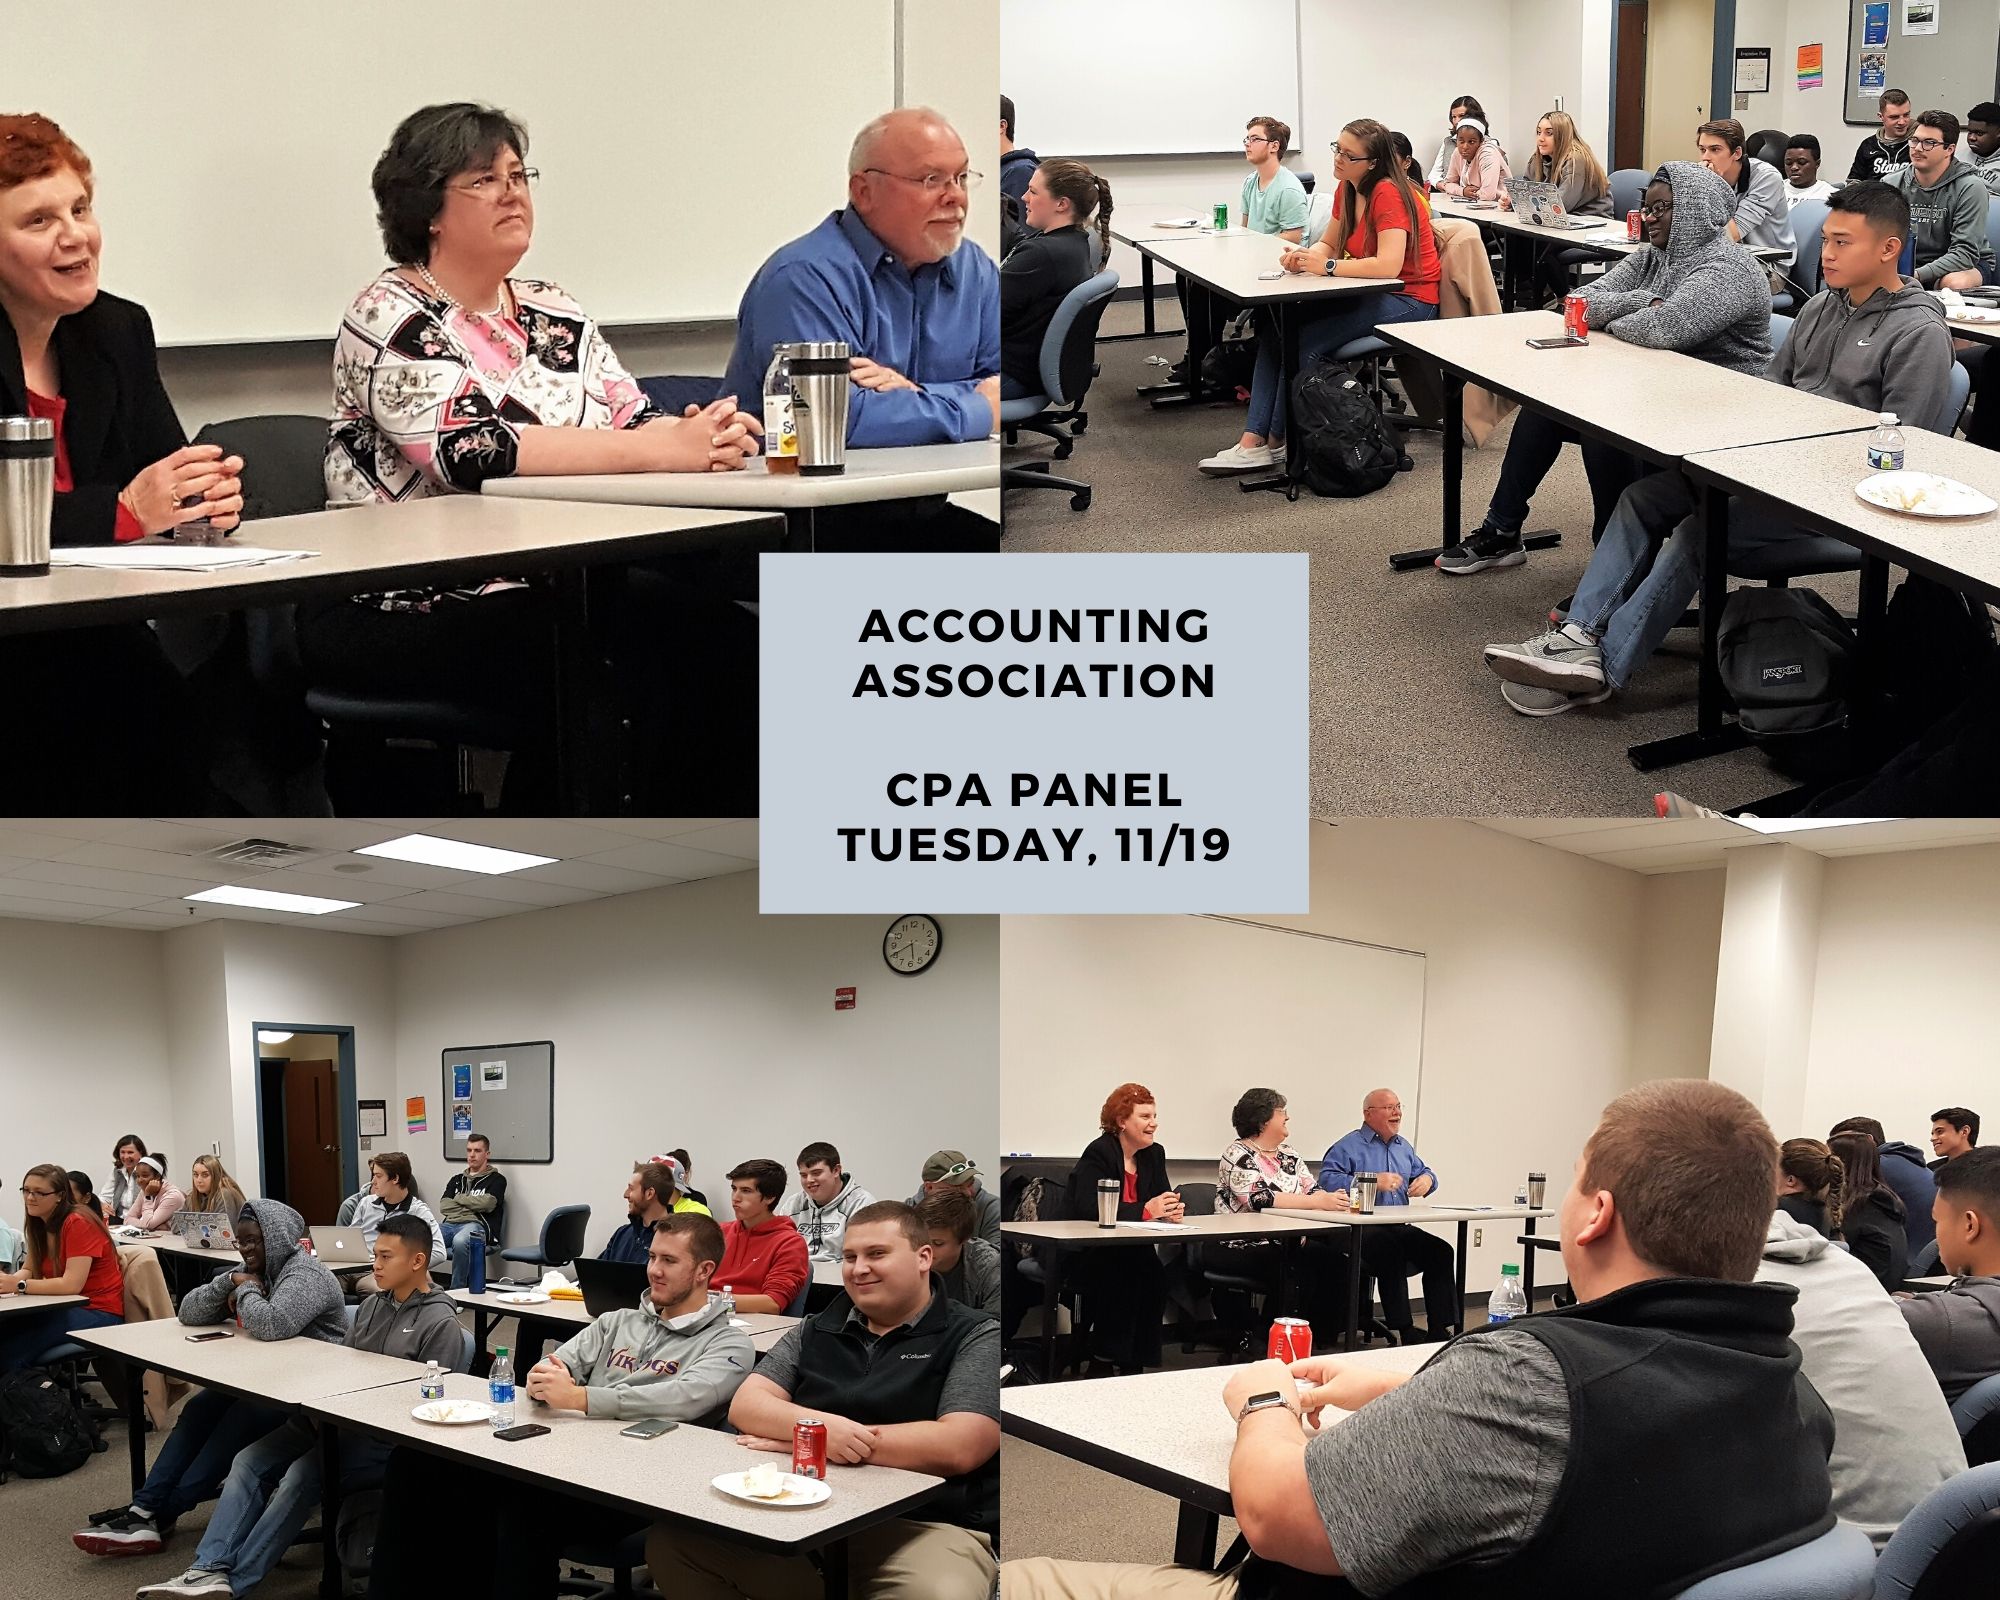 Accounting Association CPA Panel